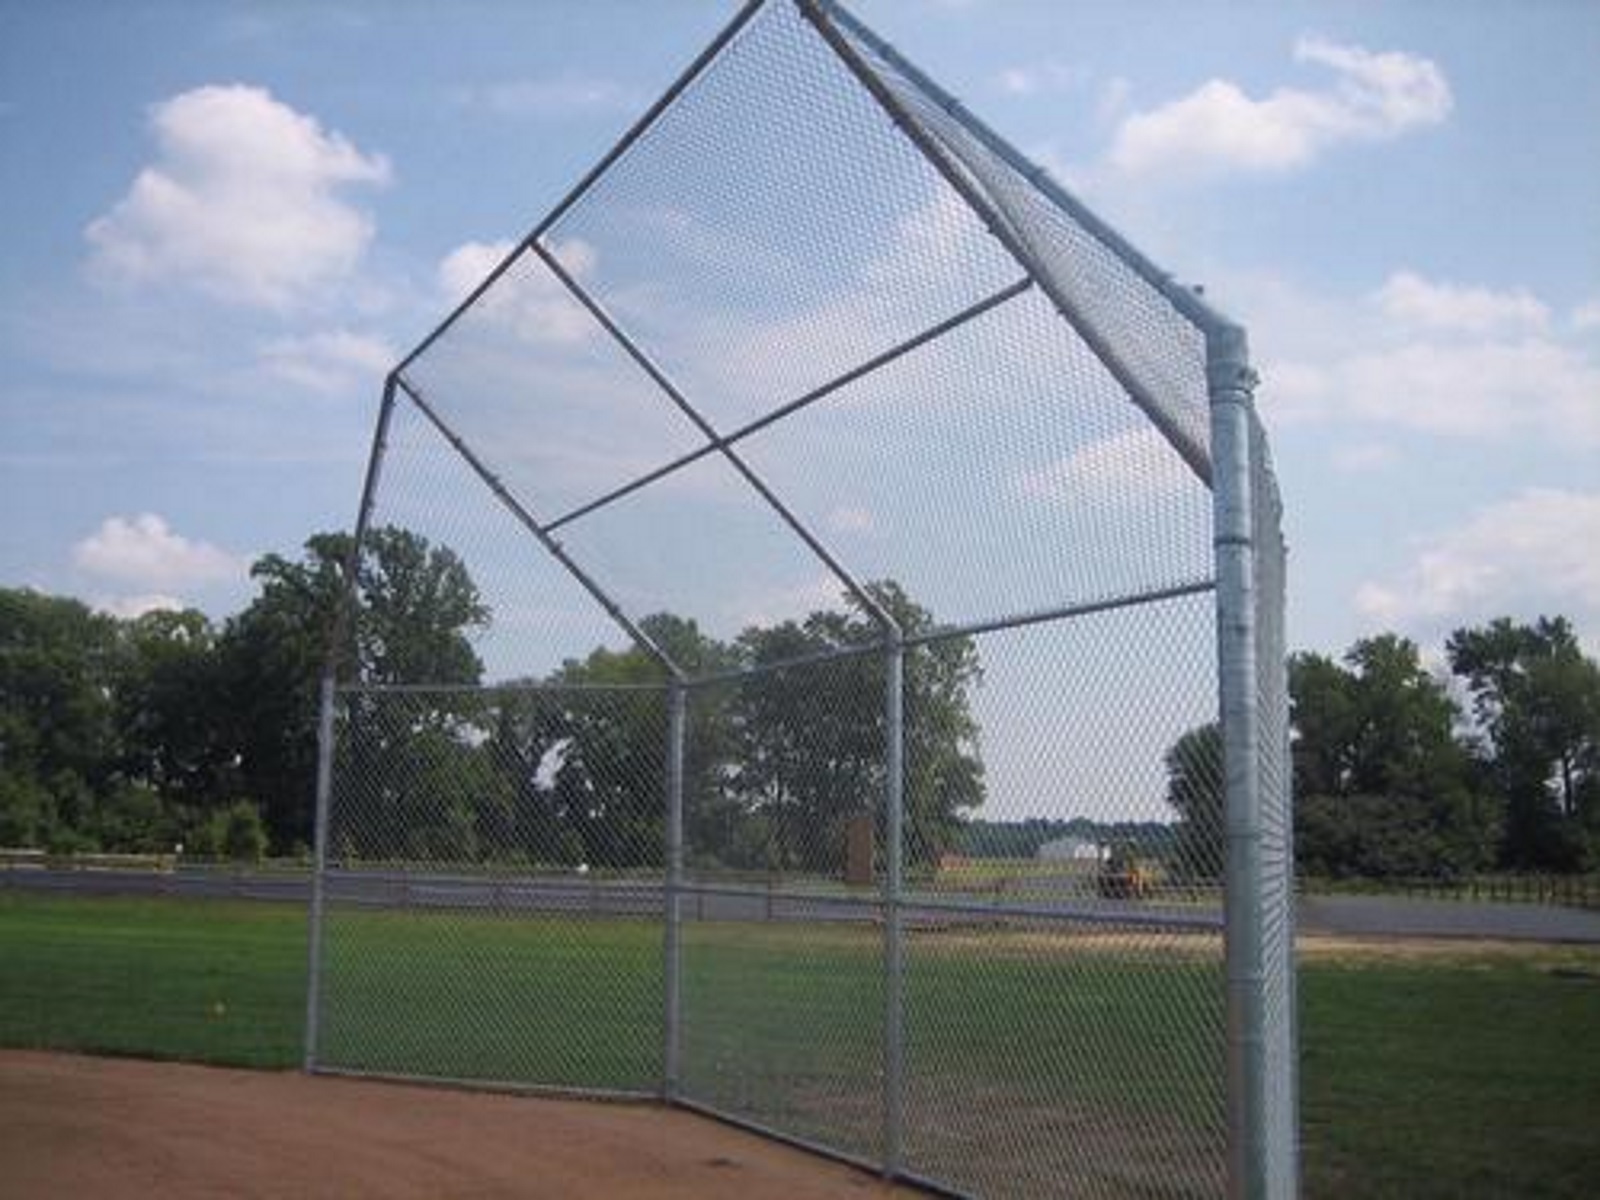 124_baseball-backstop-chainlink-fence Commercial